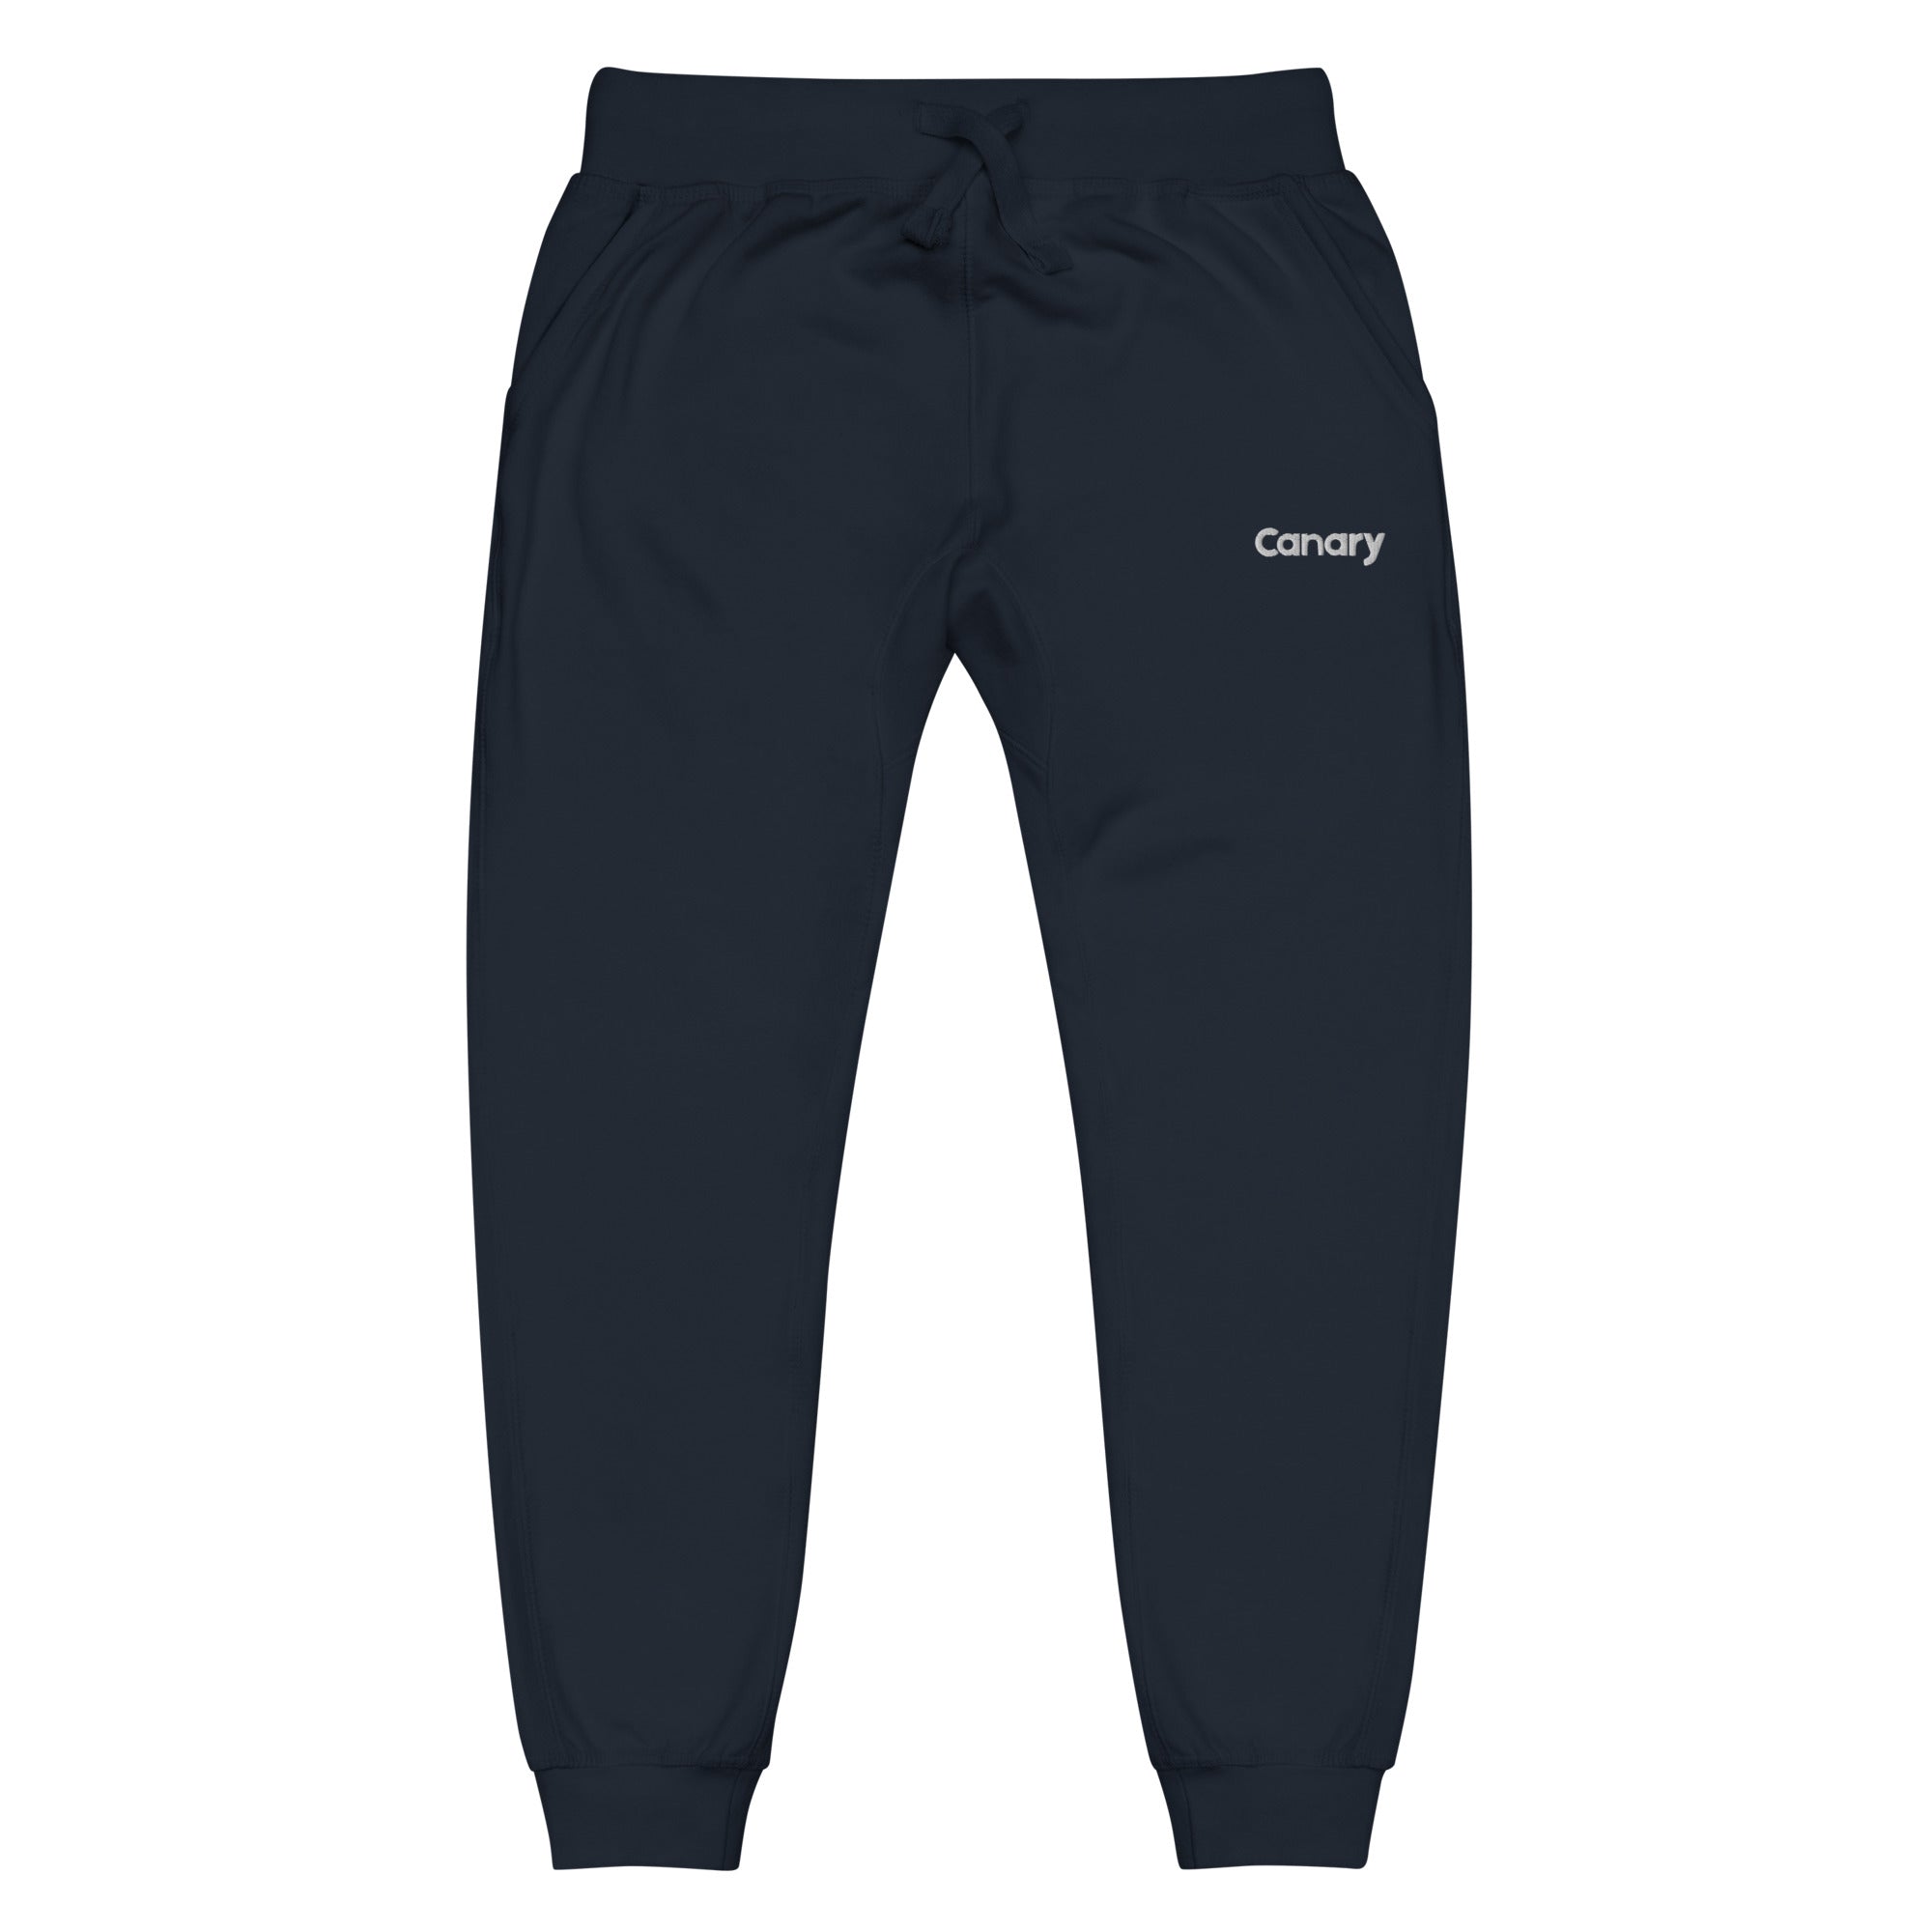 "Canary" Embroidered Sweatpants